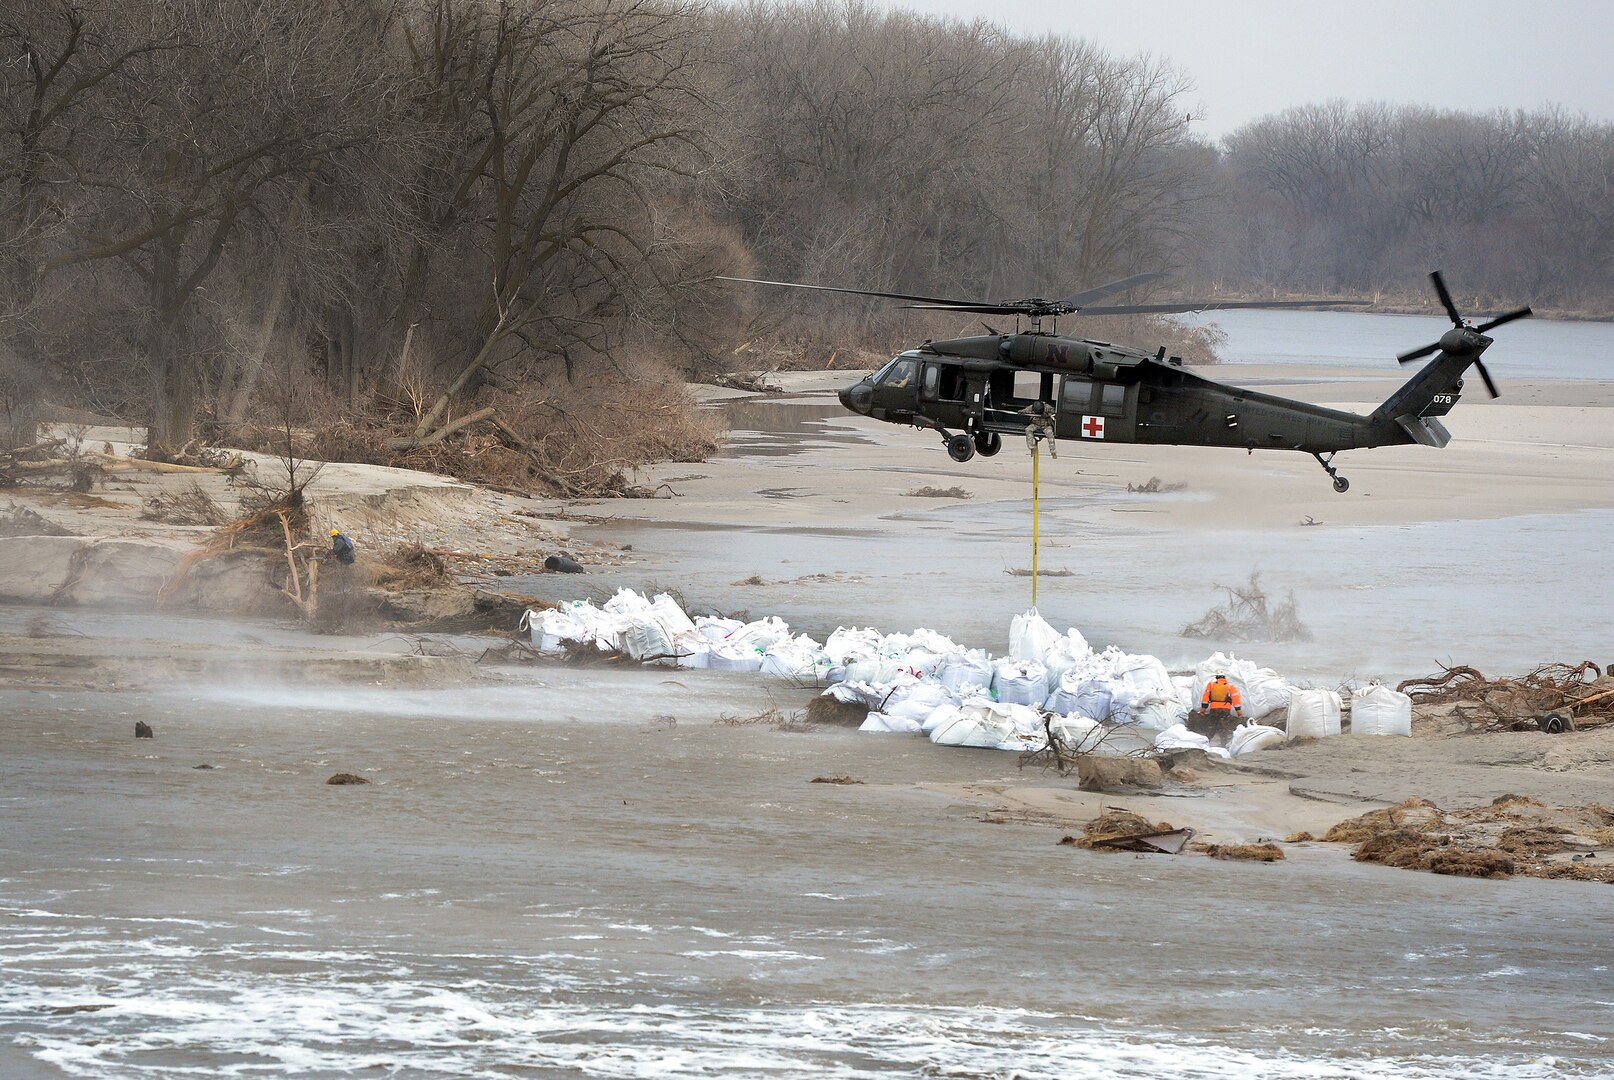 An aircrew with the Nebraska Army National Guard's 2nd Battalion, 104th Aviation Regiment, uses a UH-60 Black Hawk helicopter to lower 1,500-pound sandbags into place to stem flooding from a breached levee along the Loup River, Nebraska. More than 340 Guard members have responded to flooding in Nebraska, Missouri, Iowa and other Midwest states.